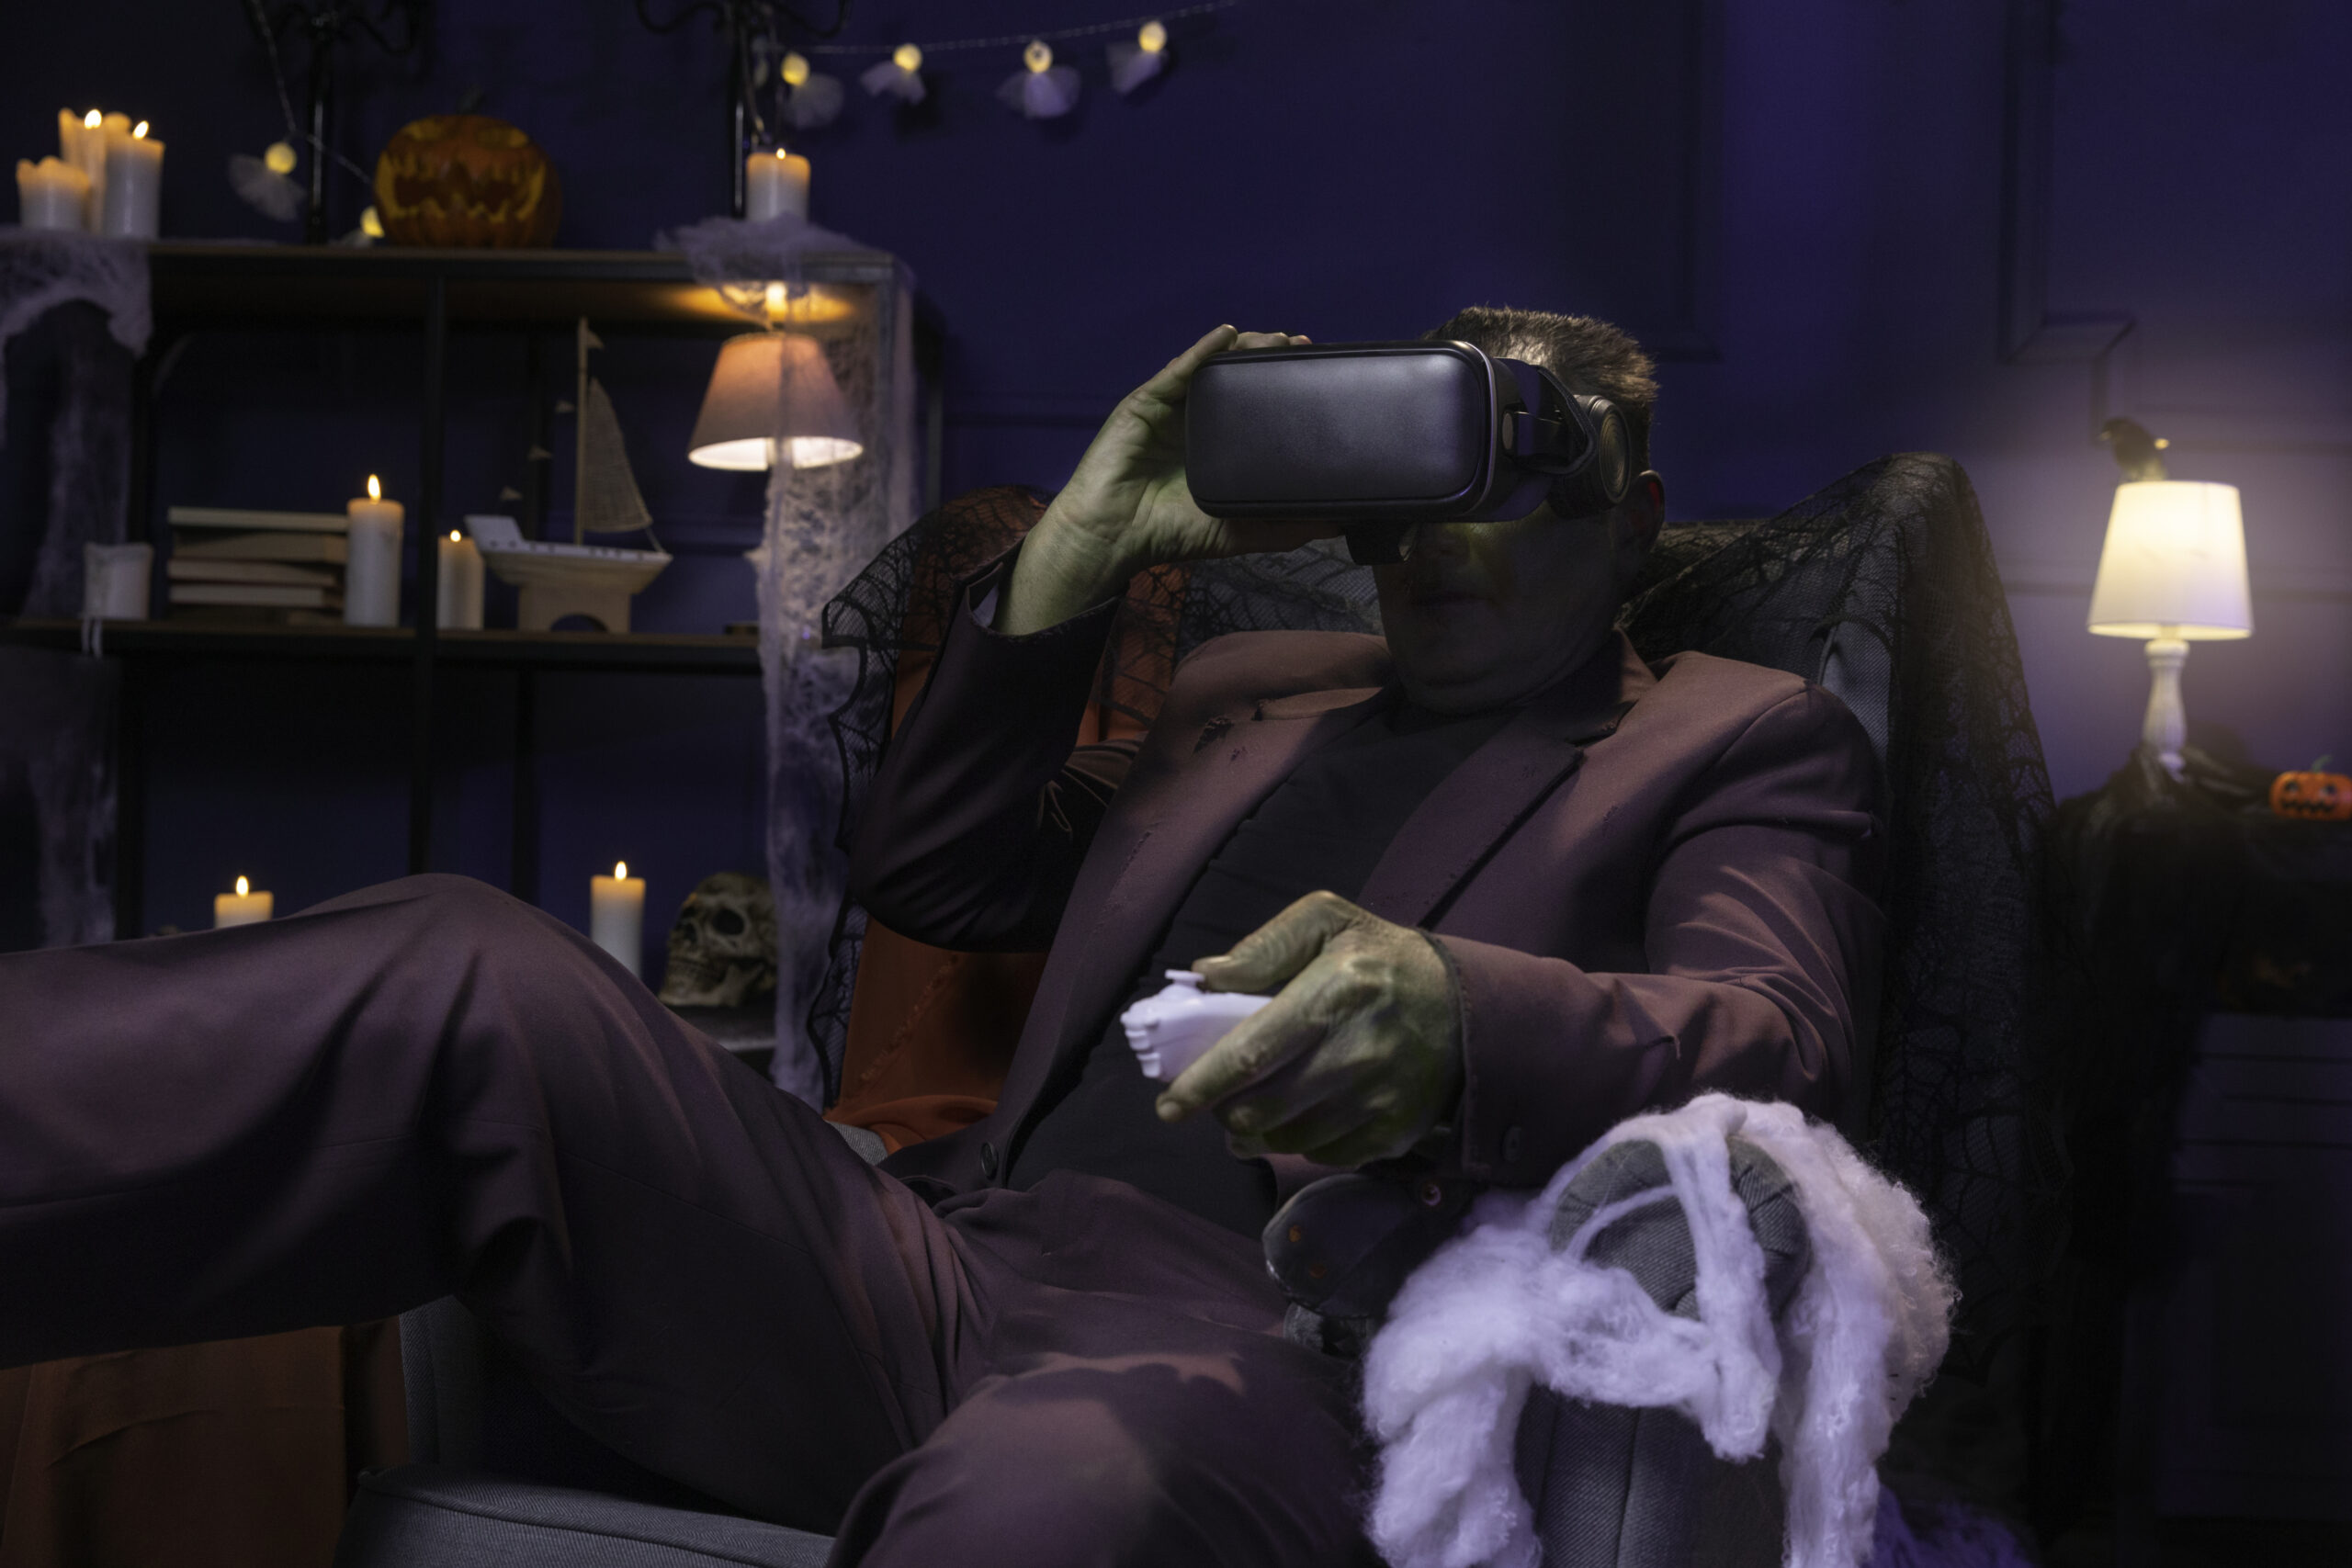 A Frankenstein with a VR headset